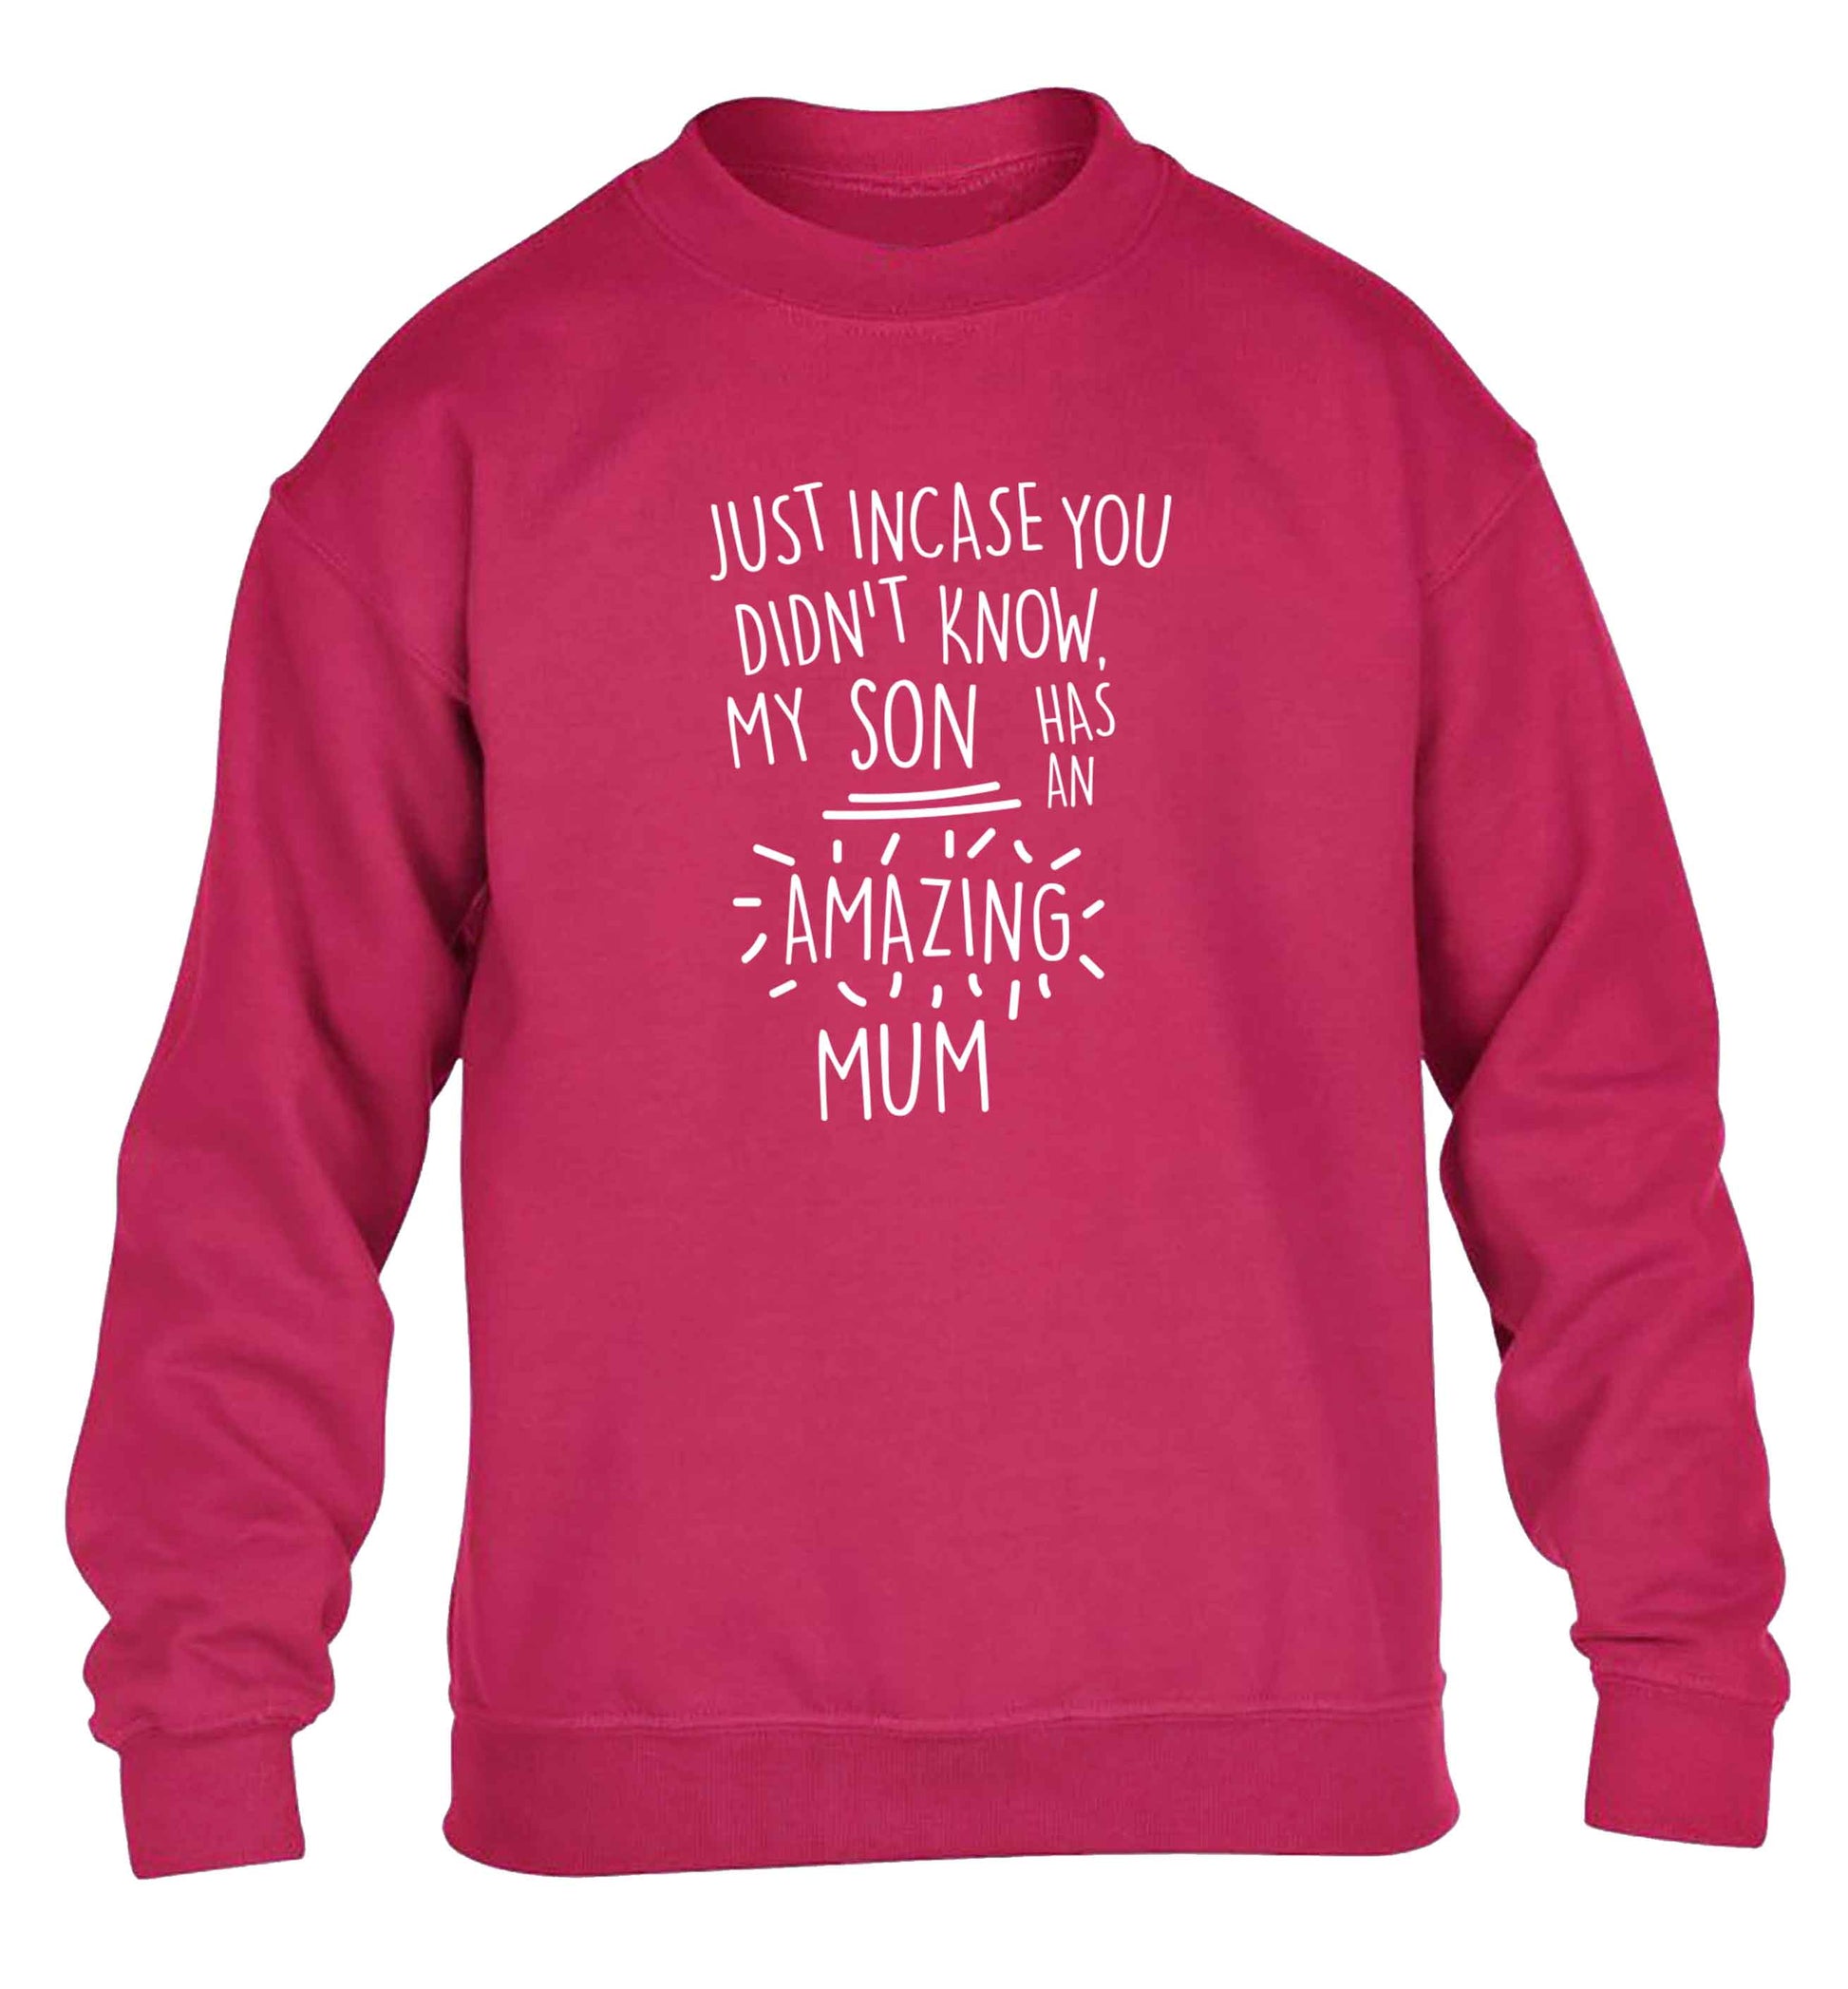 Just incase you didn't know my son has an amazing mum children's pink sweater 12-13 Years